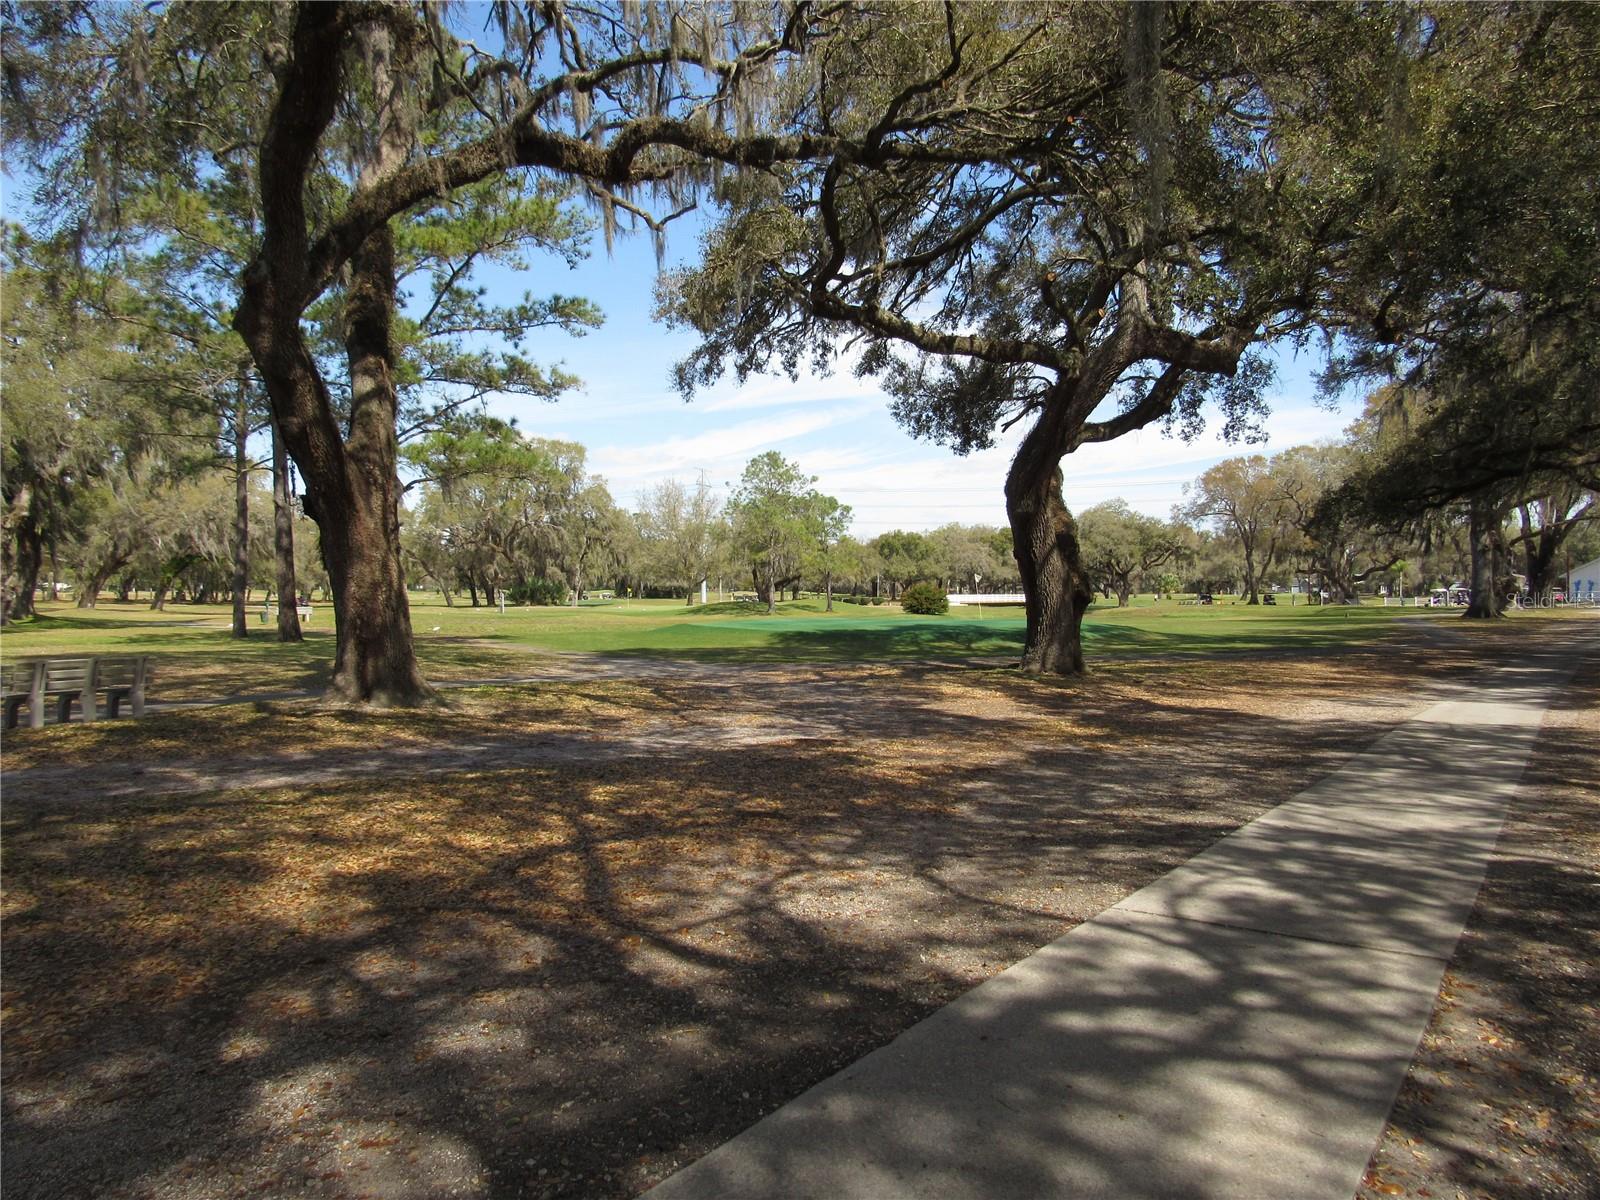 Memorial walkway and golf course.